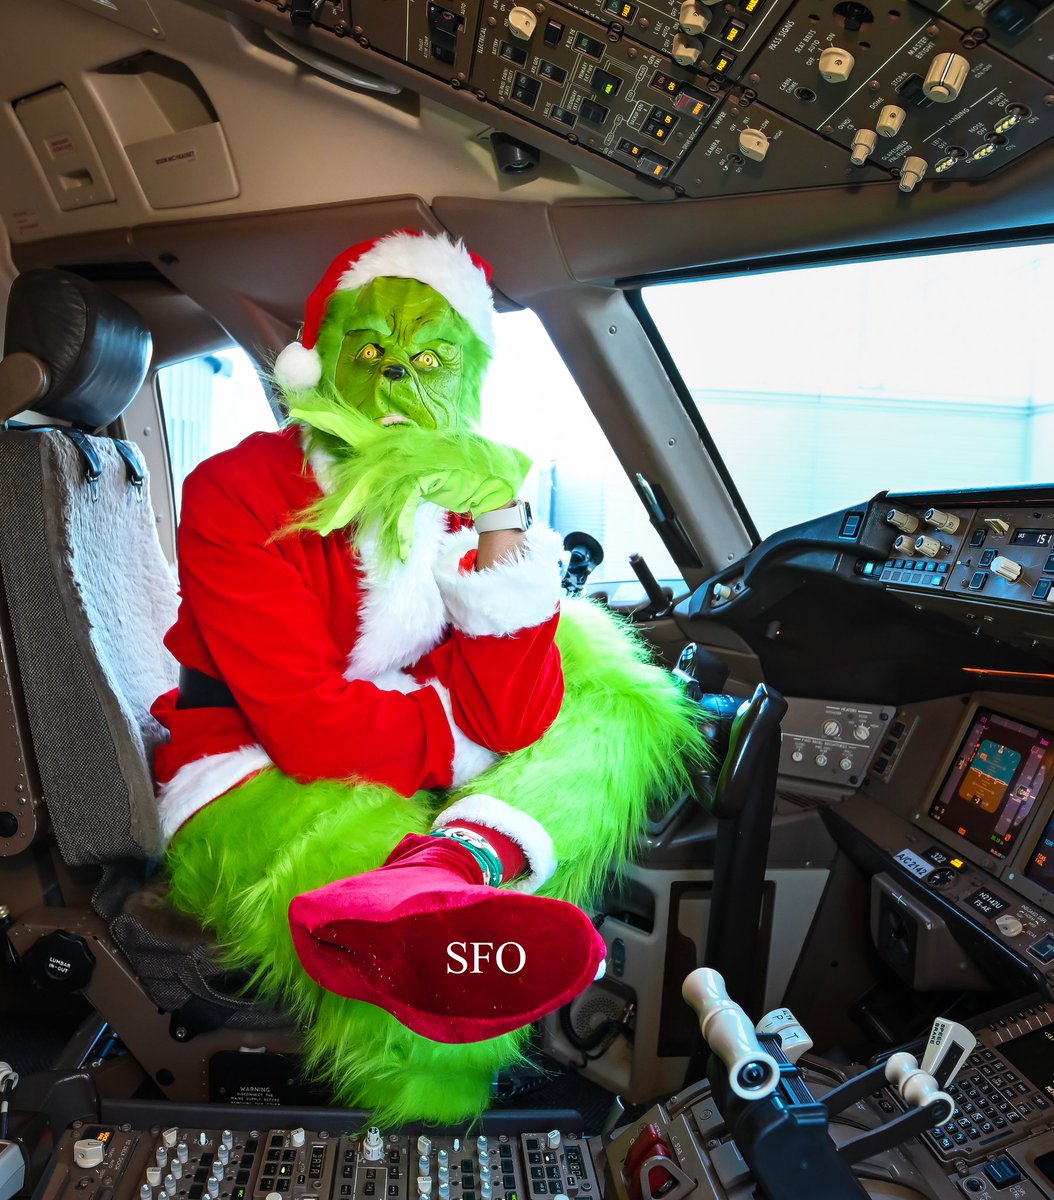 @united @Auggiie69 @almira_sam @MikeHannaUAL @sychew51 @annie54c The Grinch escaped from Whoville and is running wild in SFO. I hope he makes it back to Whoville in time for the Fantasy Flight Parade tomorrow. #teamsfo #fantasyflight #wheregoodleadstheway.